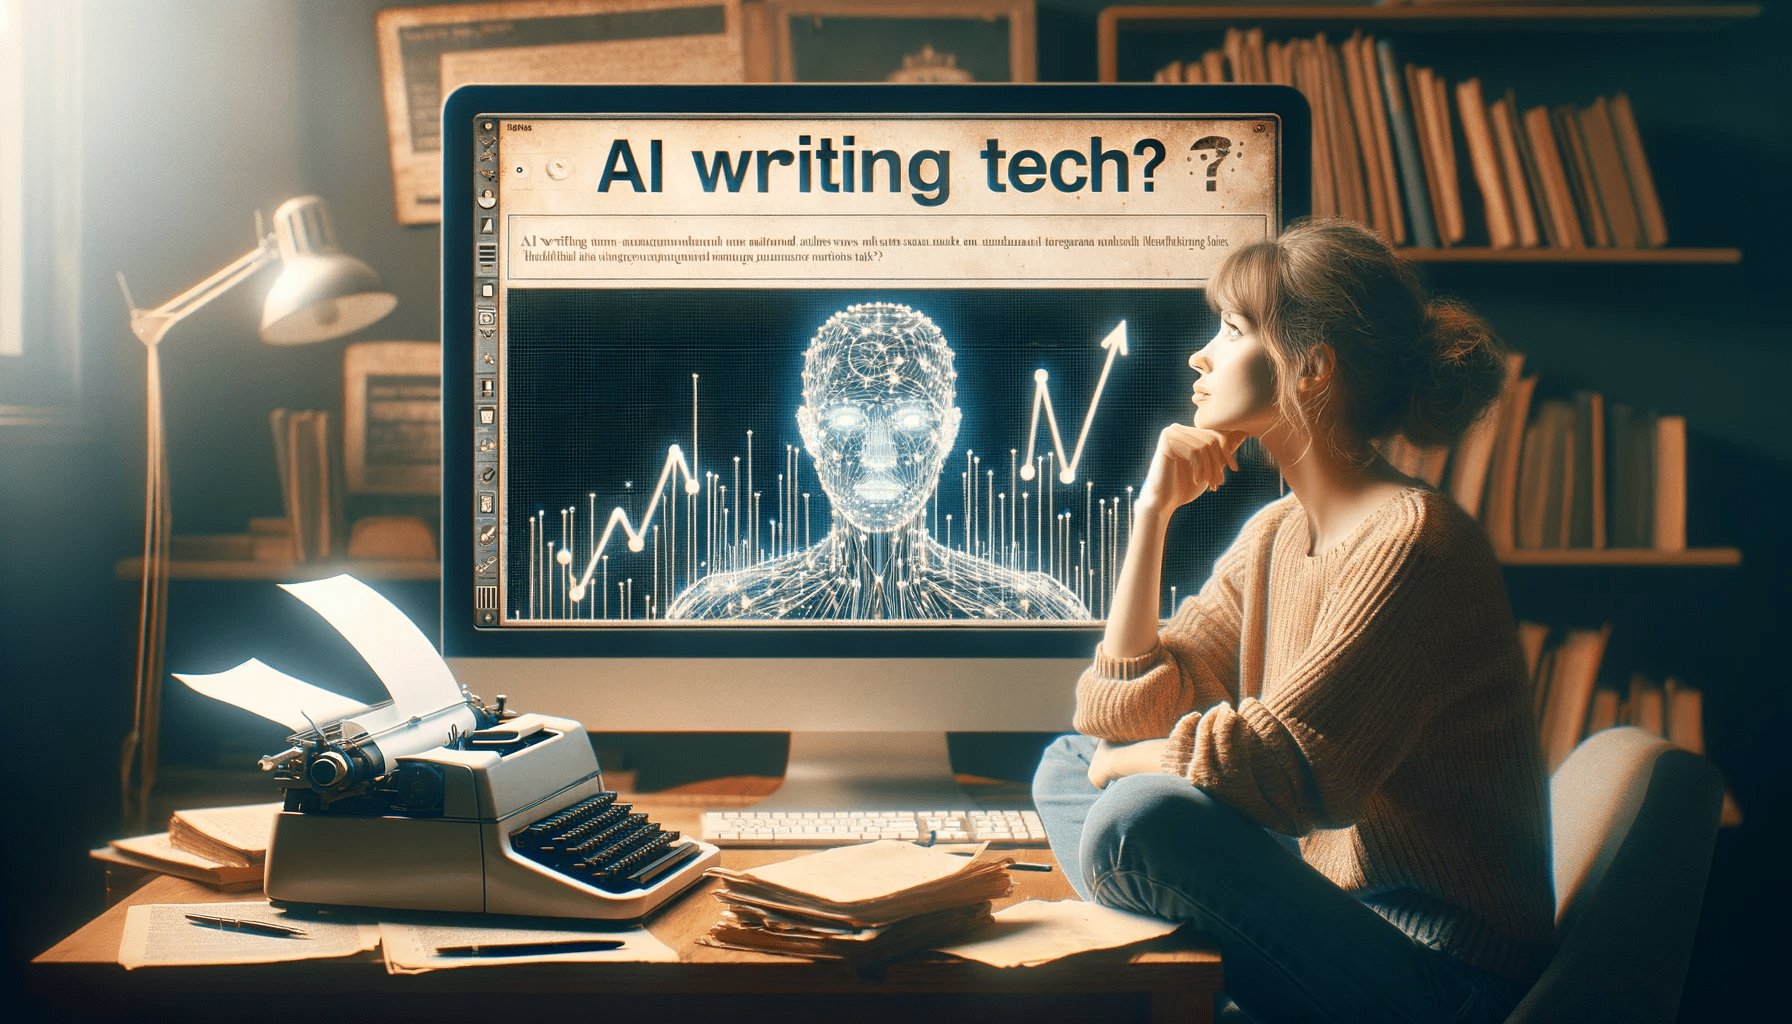 AI essay models are taking jobs from human essay writers